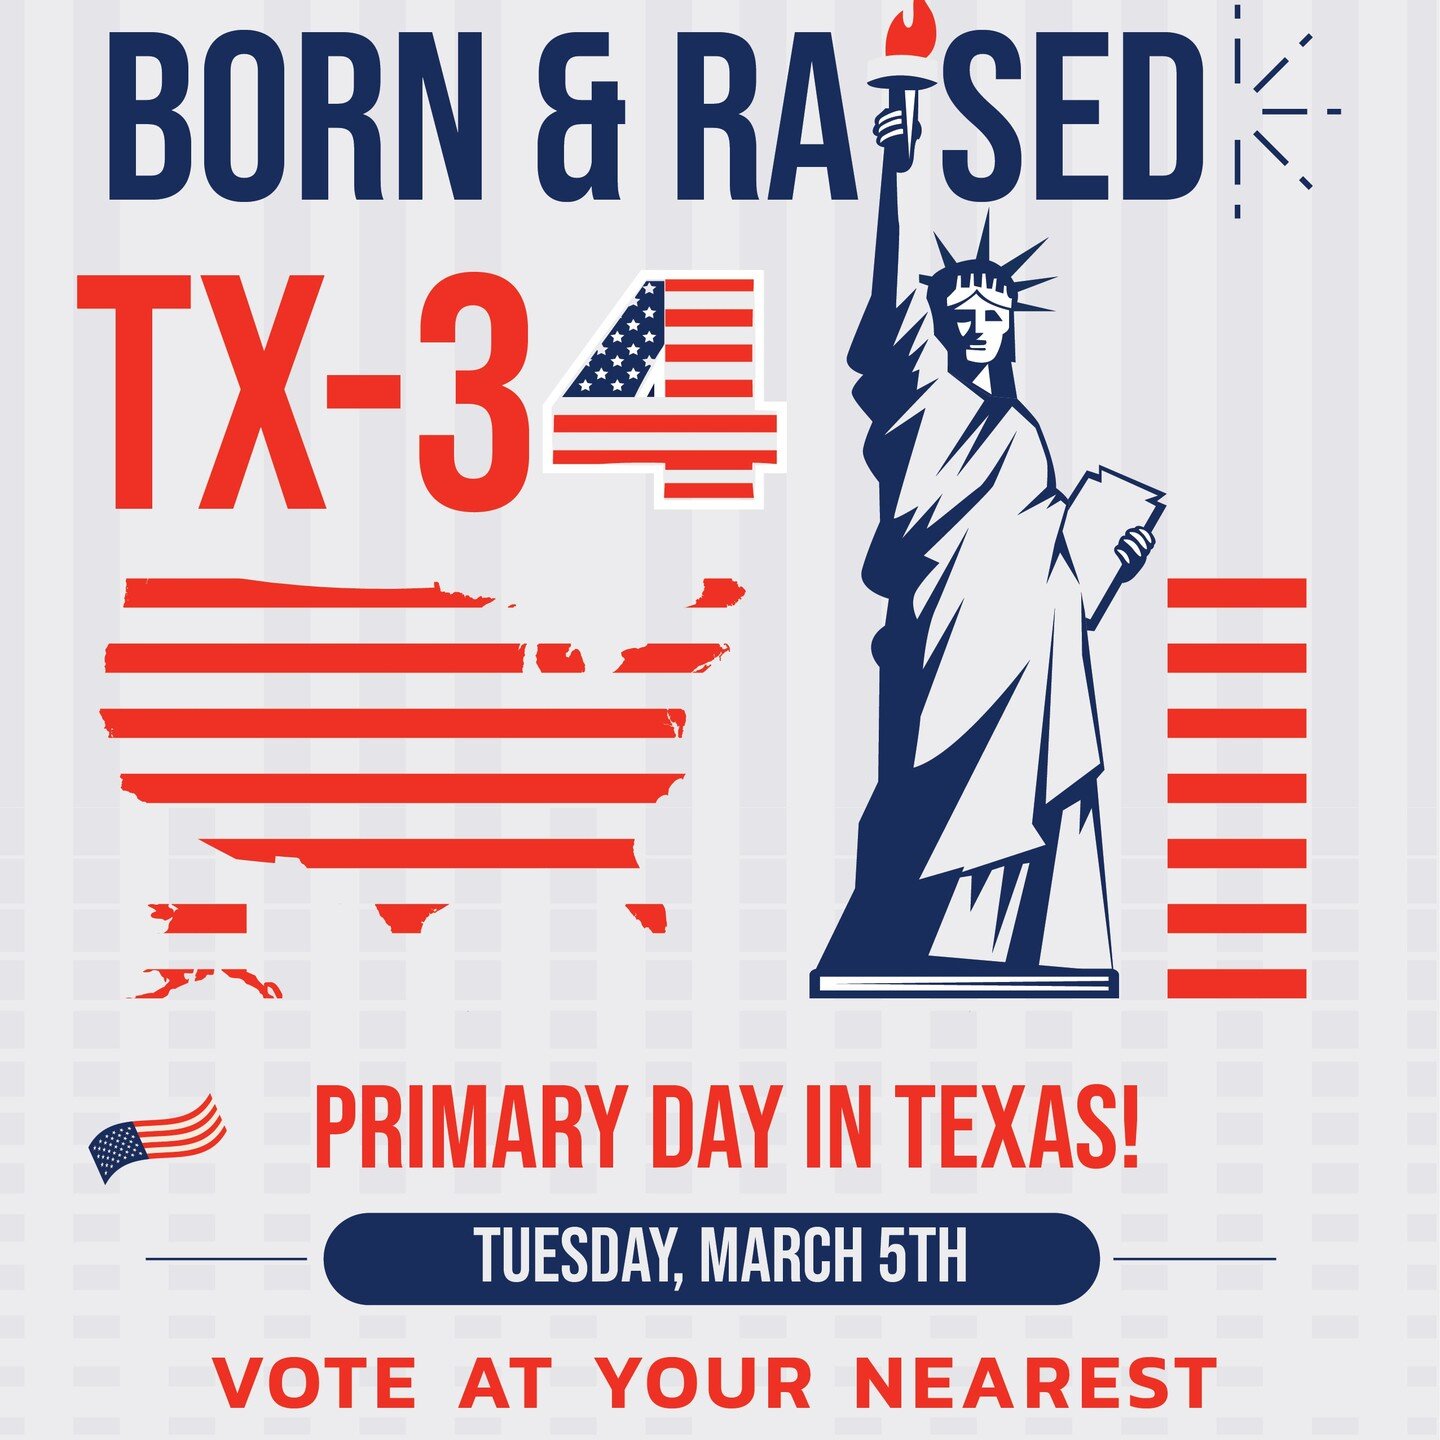 Record early voting turnout for Republicans in #southtexas! Do you have a plan to vote tomorrow to finish the job? Make a plan today to vote for #kunkleforcongress at your nearest polling place. I am here to work for you in putting #familyfirst back 